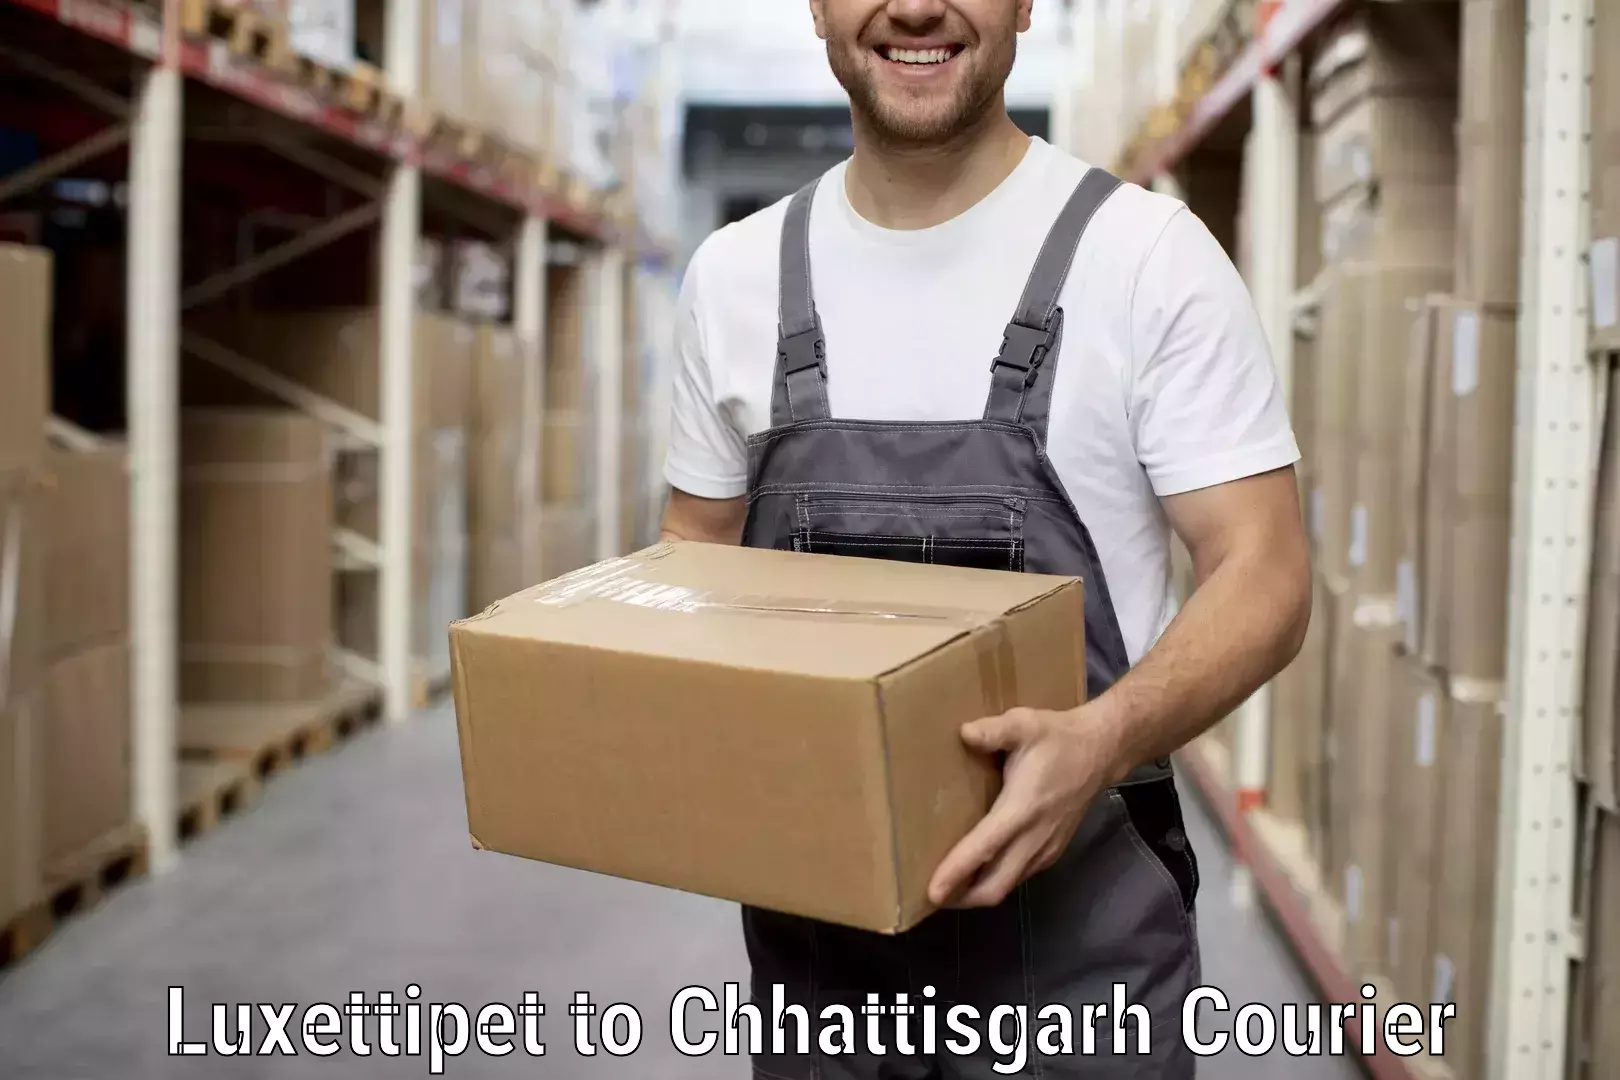 Furniture delivery service Luxettipet to Raigarh